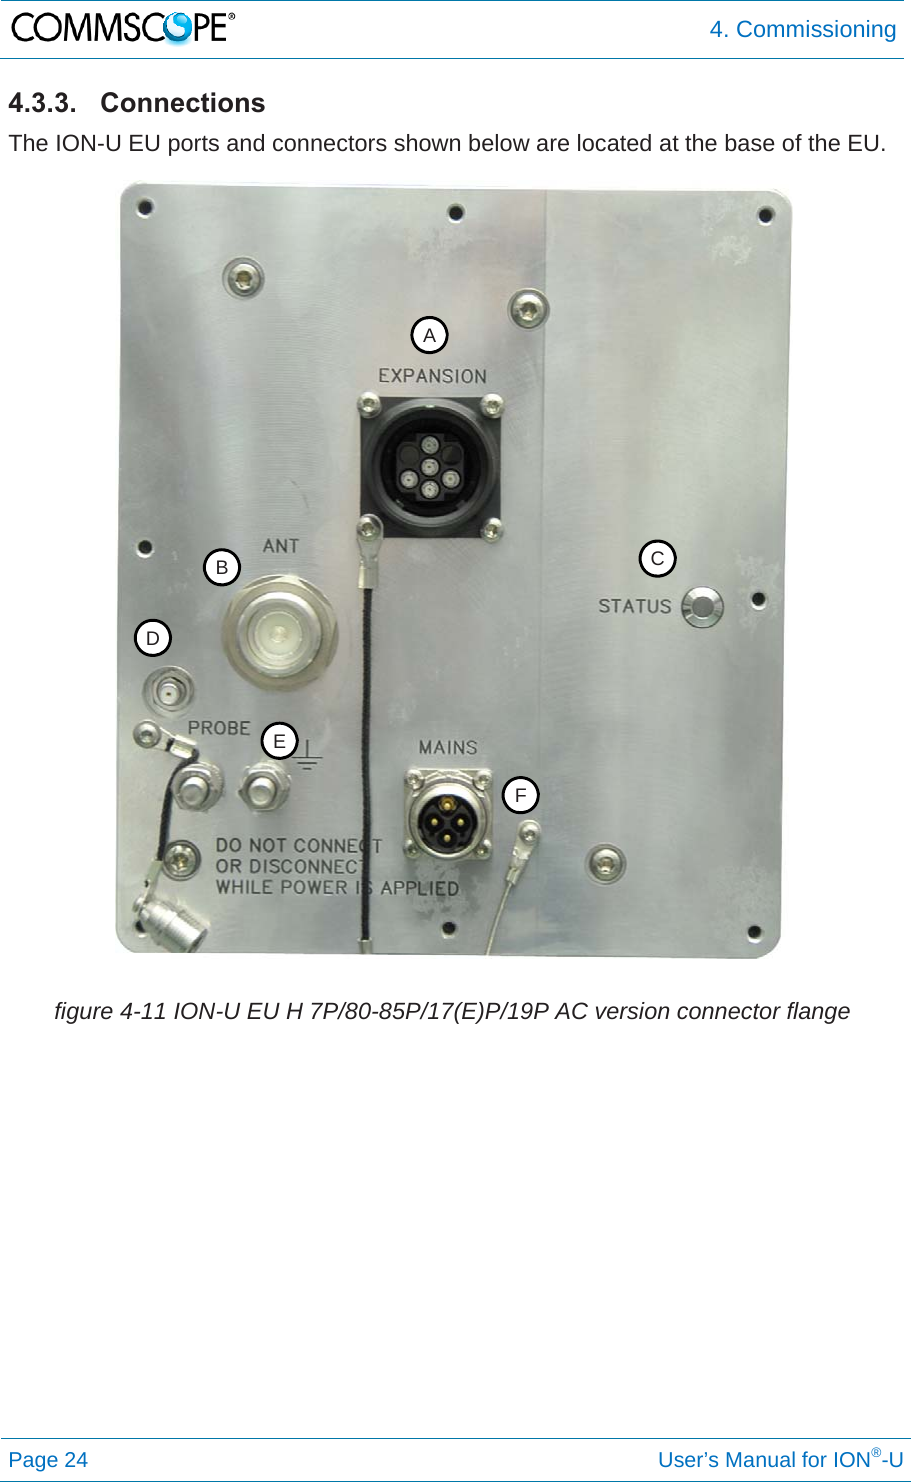  4. Commissioning Page 24     User’s Manual for ION®-U 4.3.3. Connections The ION-U EU ports and connectors shown below are located at the base of the EU.   figure 4-11 ION-U EU H 7P/80-85P/17(E)P/19P AC version connector flange   AB  CD E F